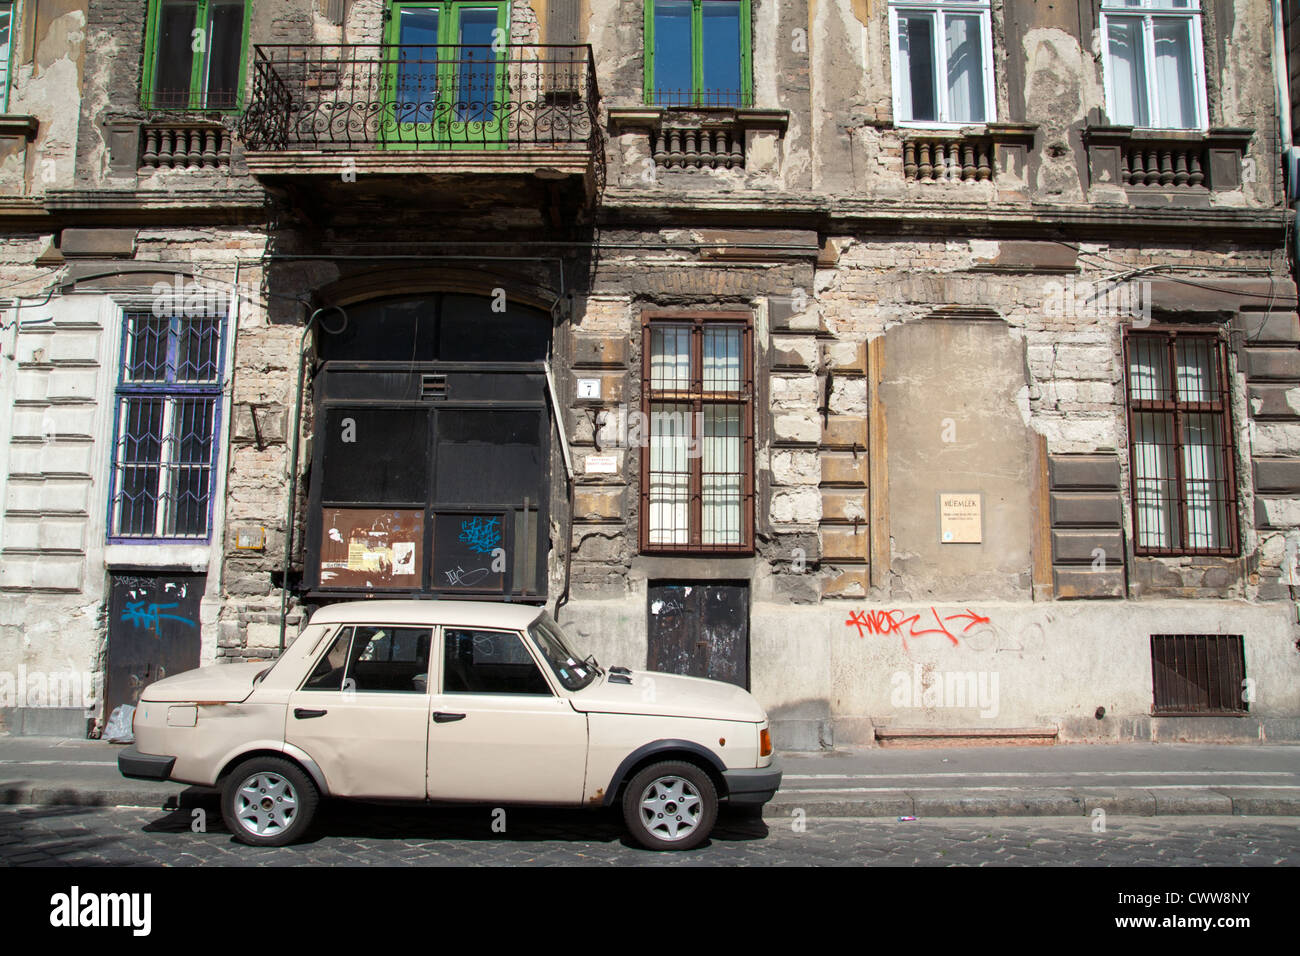 Lada car in a street in Budapest Stock Photo